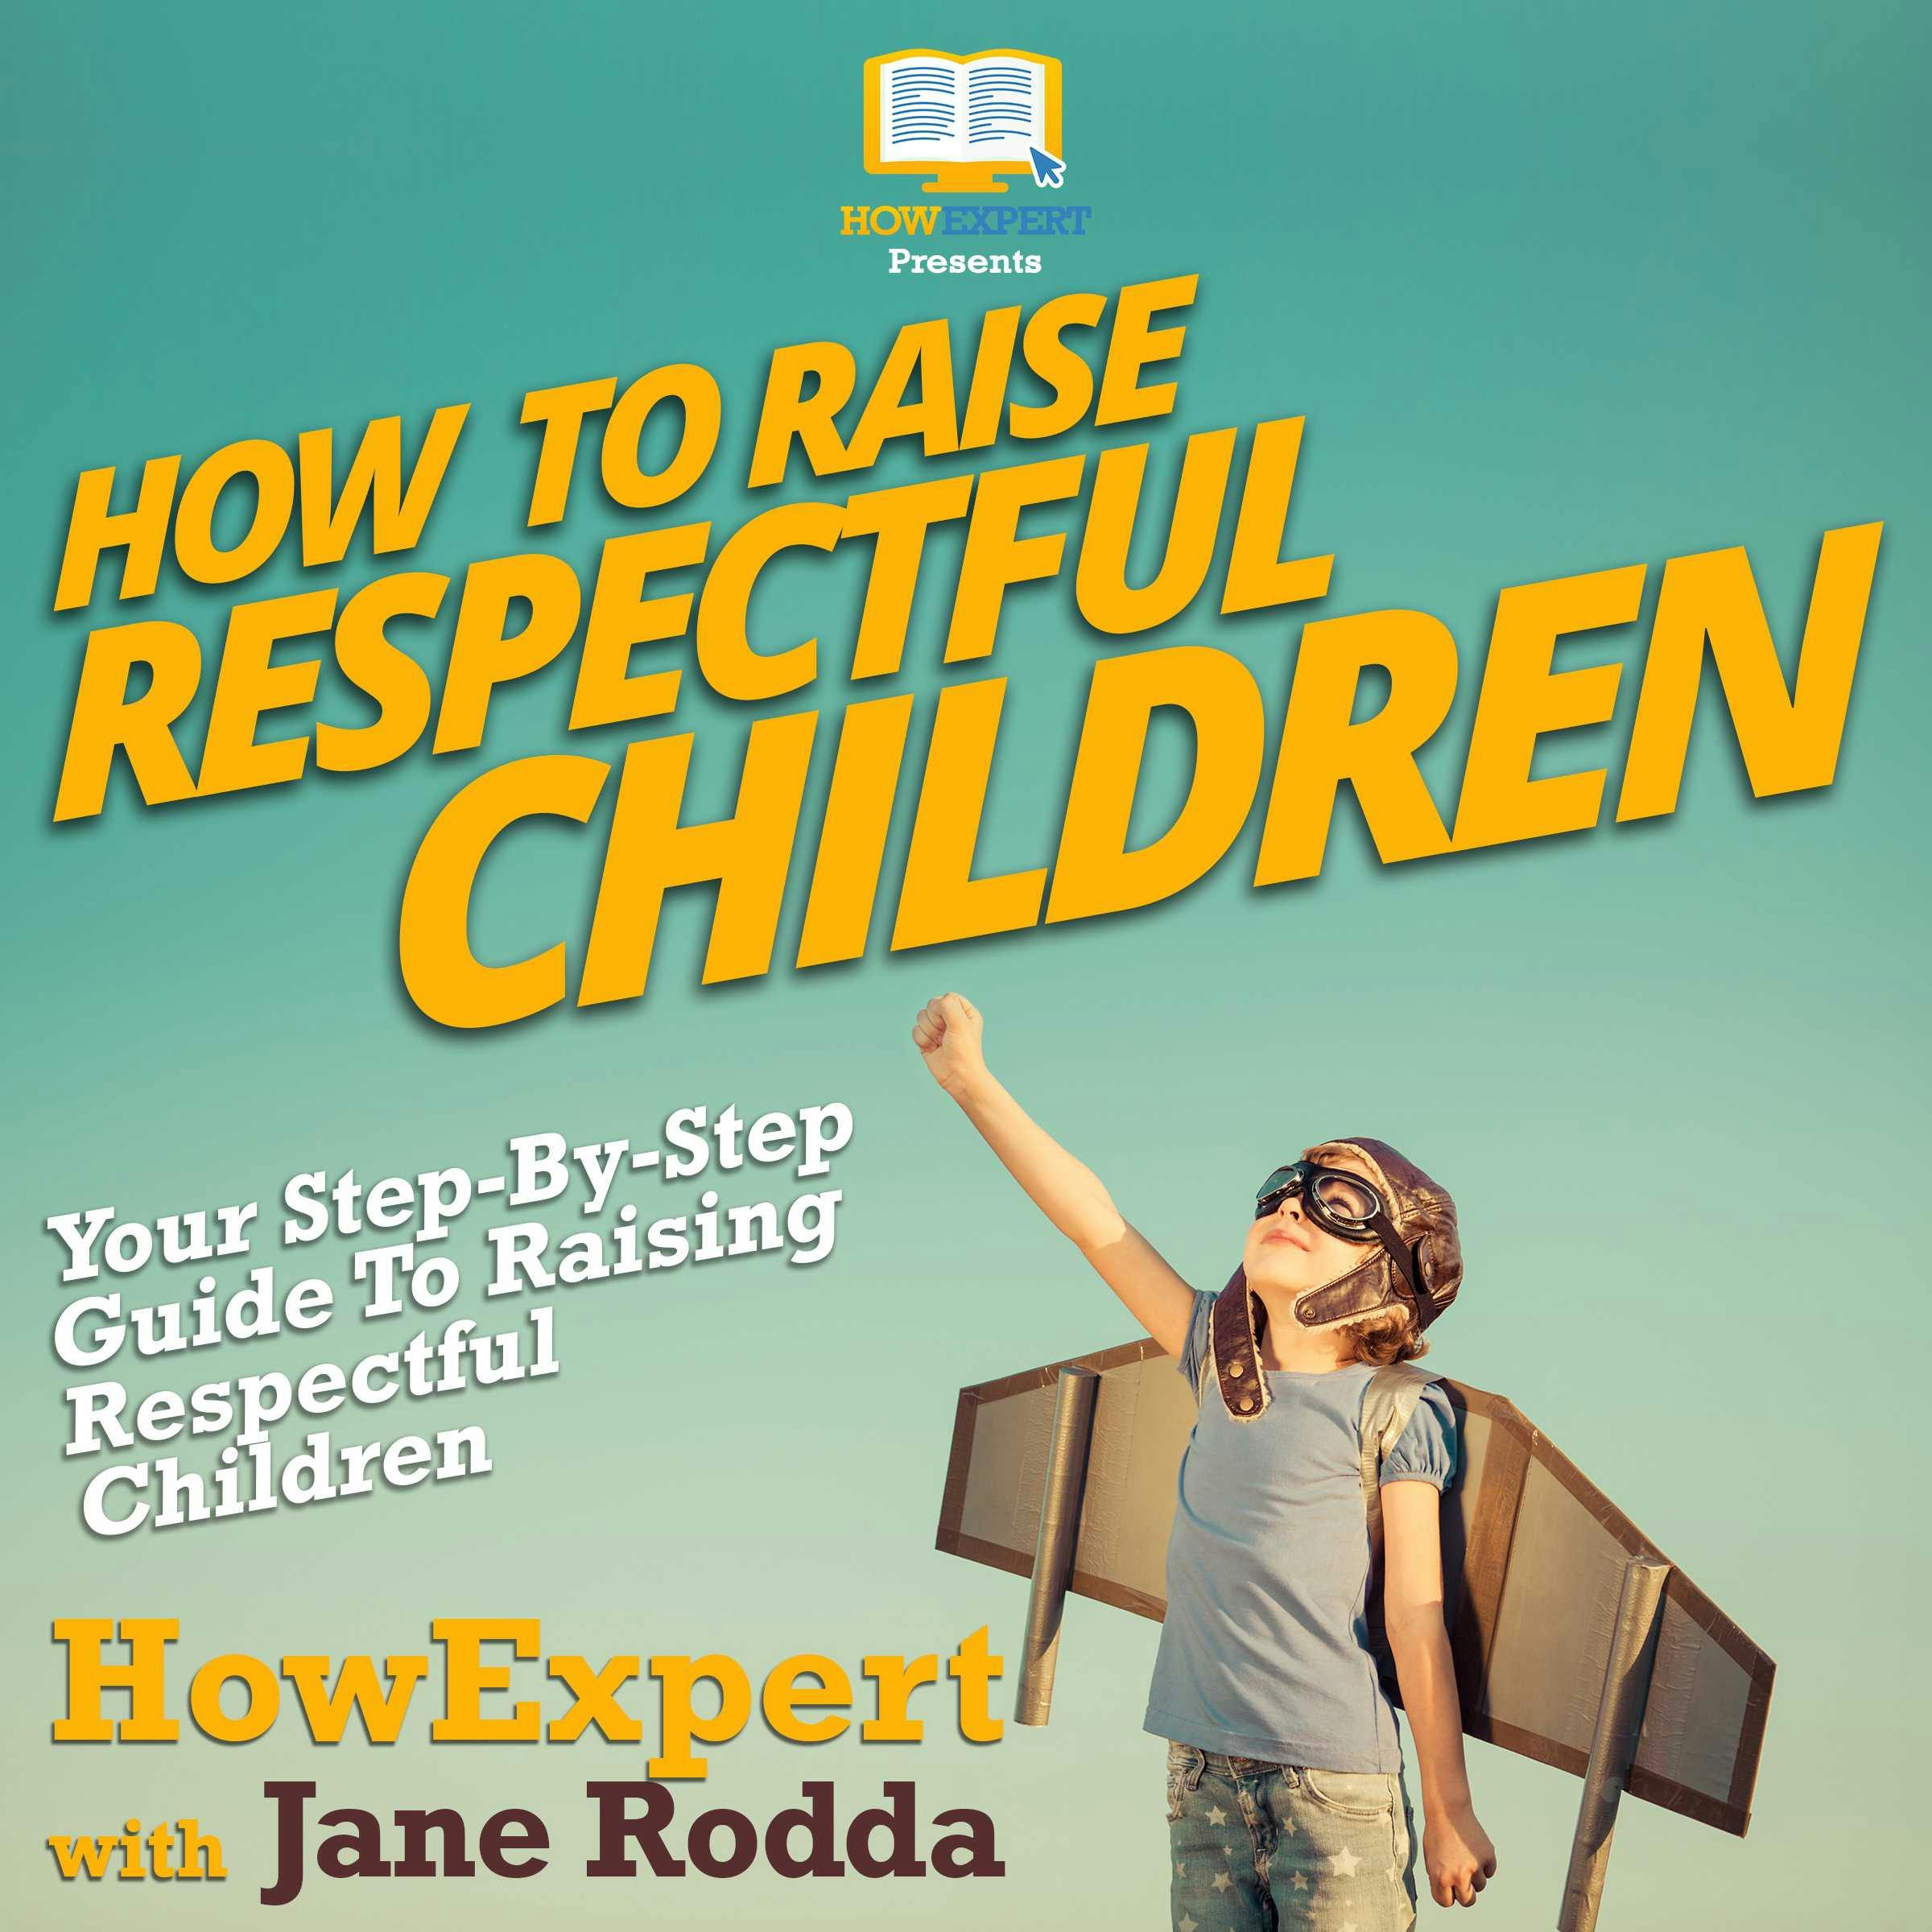 How To Raise Respectful Children: Your Step By Step Guide To Raising Respectful Children - undefined